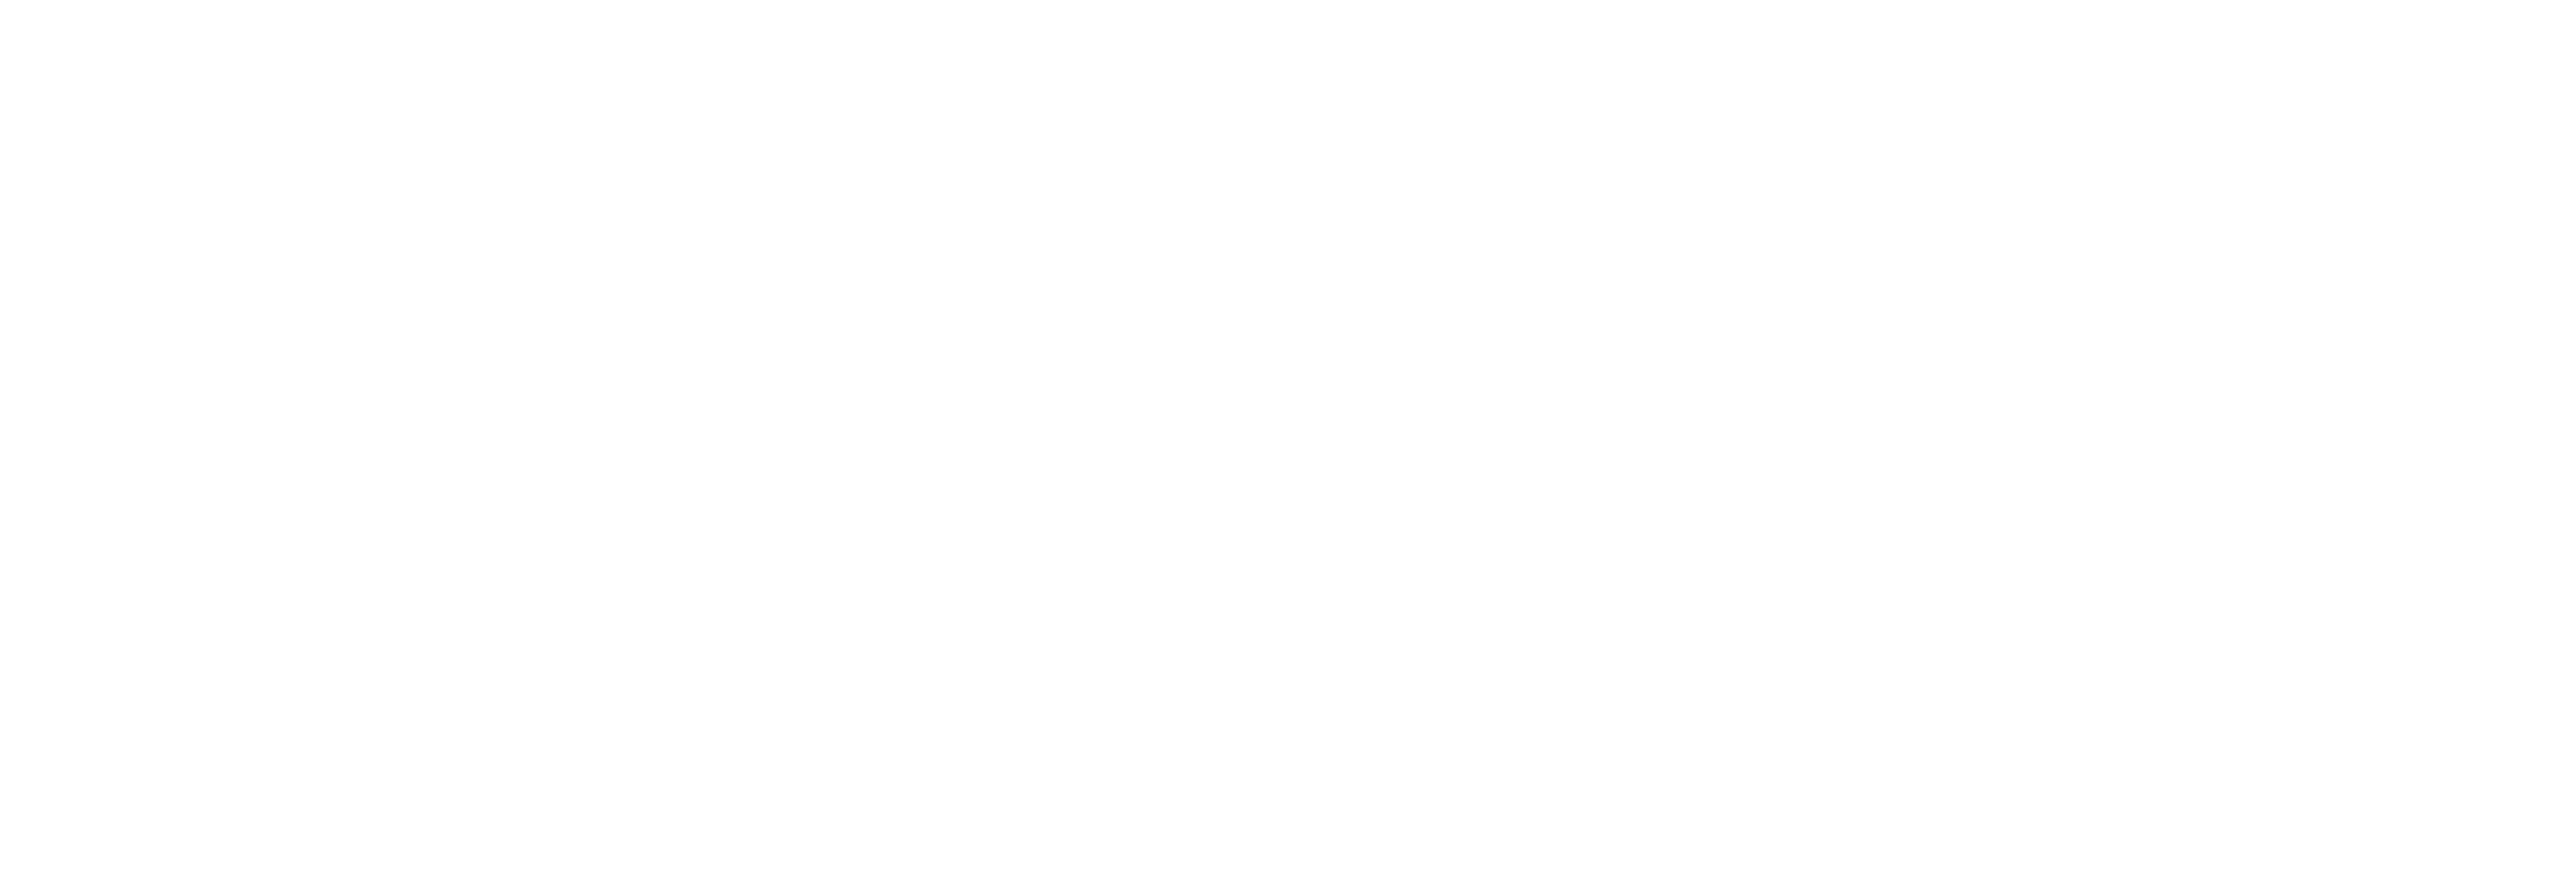 Type=Training, Color=White@2x